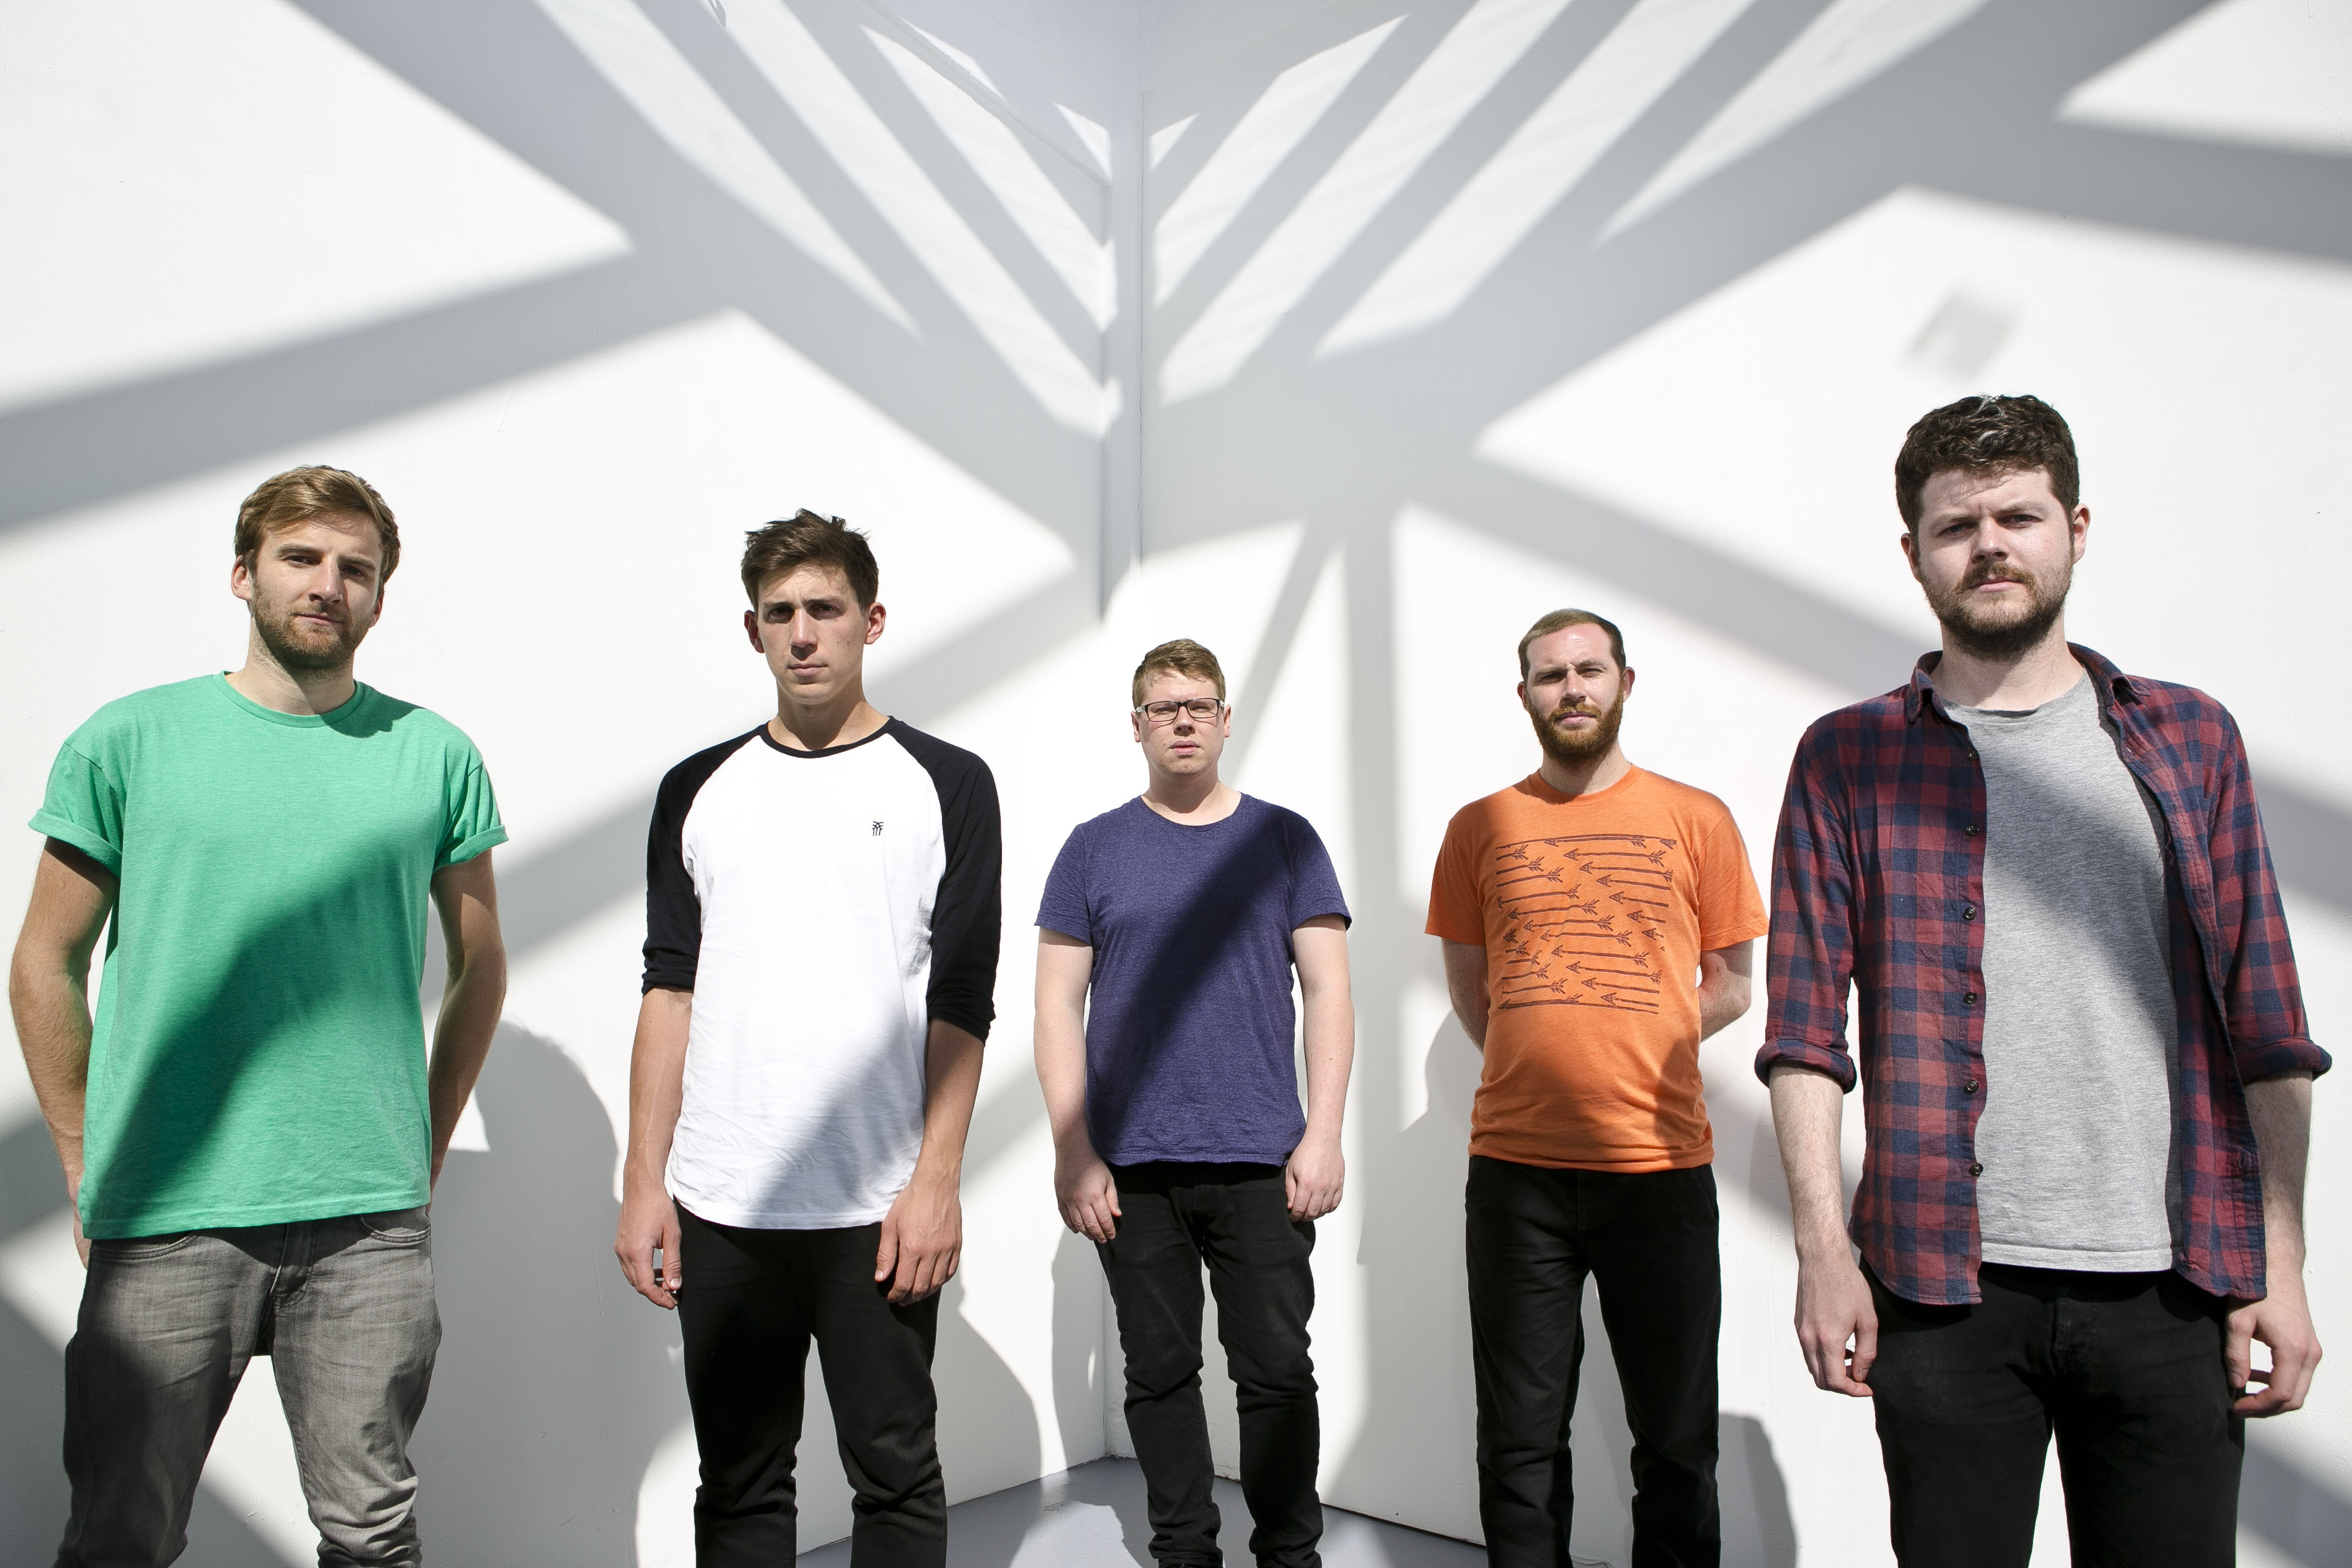 We Were Promised Jetpacks unveil new music video